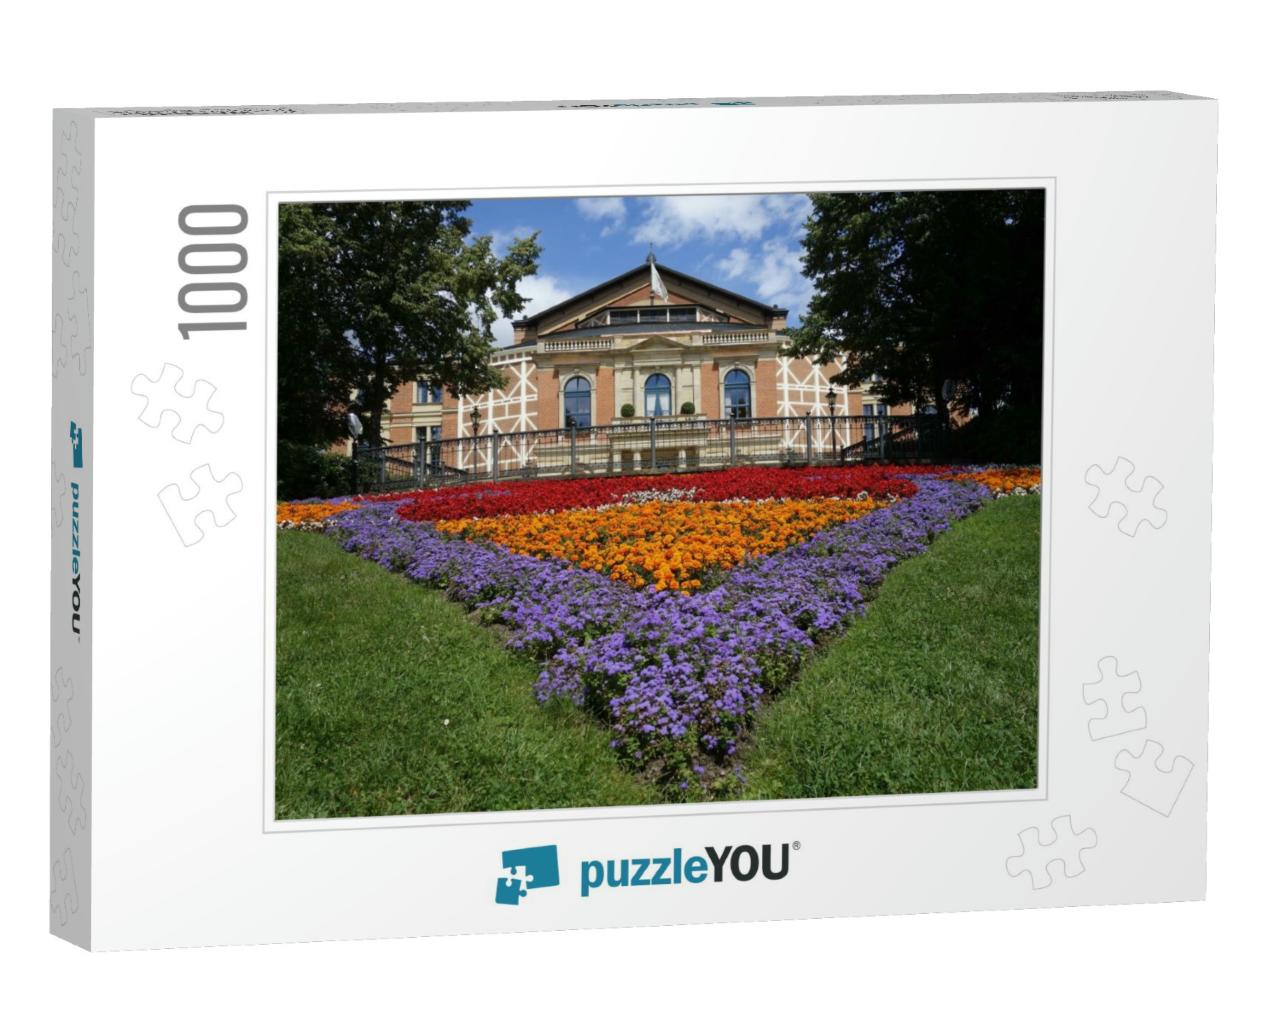 Festspielhaus Bayreuth in Bayern, Bavaria, Composer, Rich... Jigsaw Puzzle with 1000 pieces